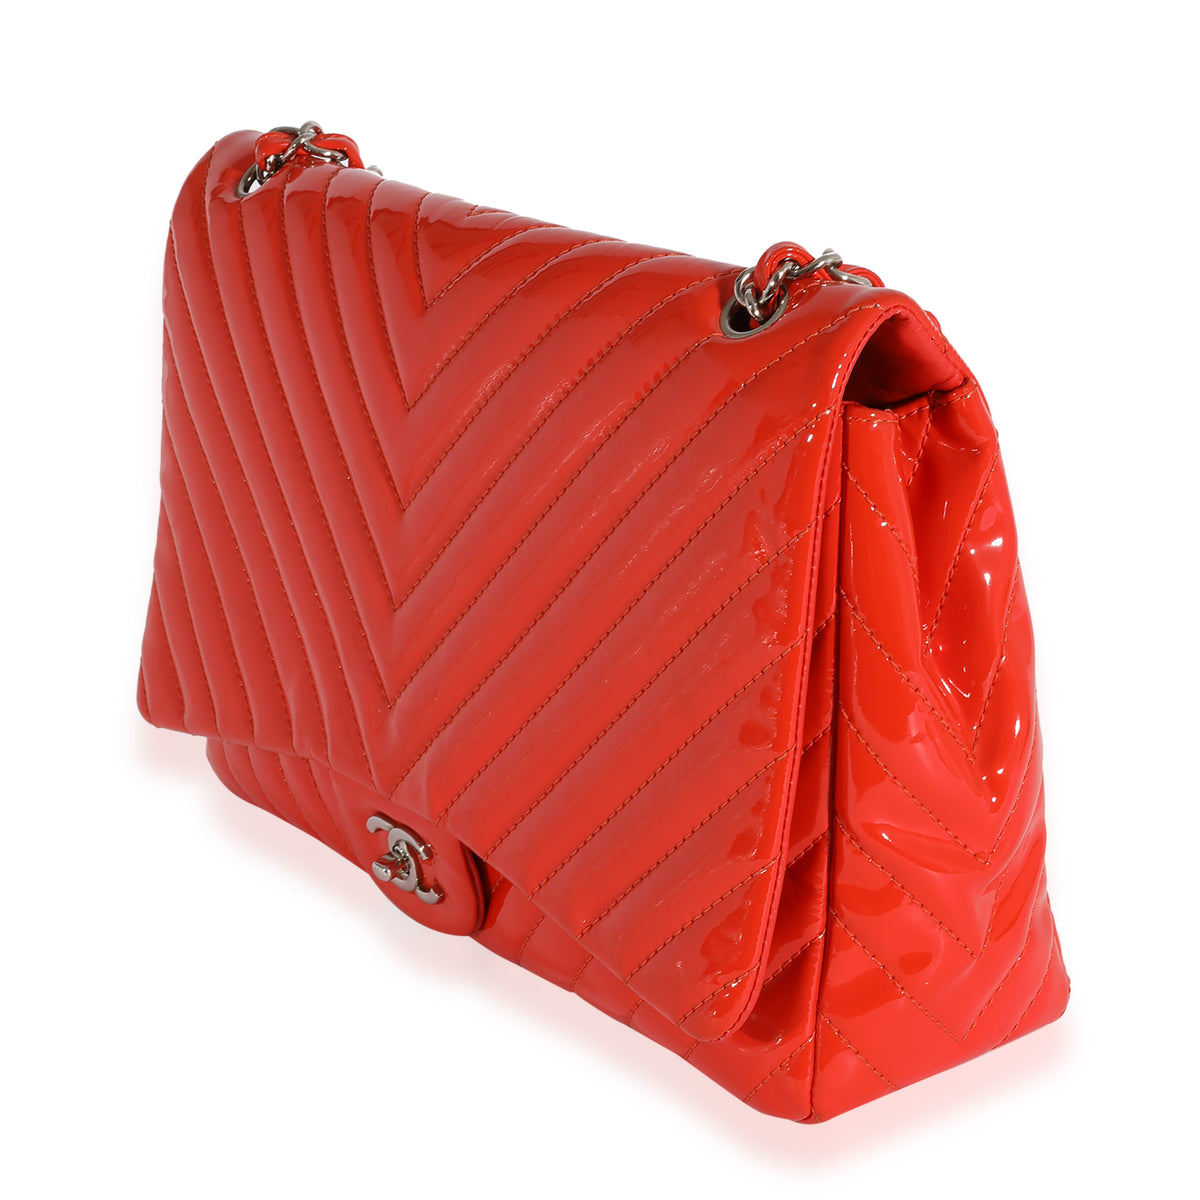 Chanel Red Chevron Quilted Patent Leather Medium Single Flap Bag